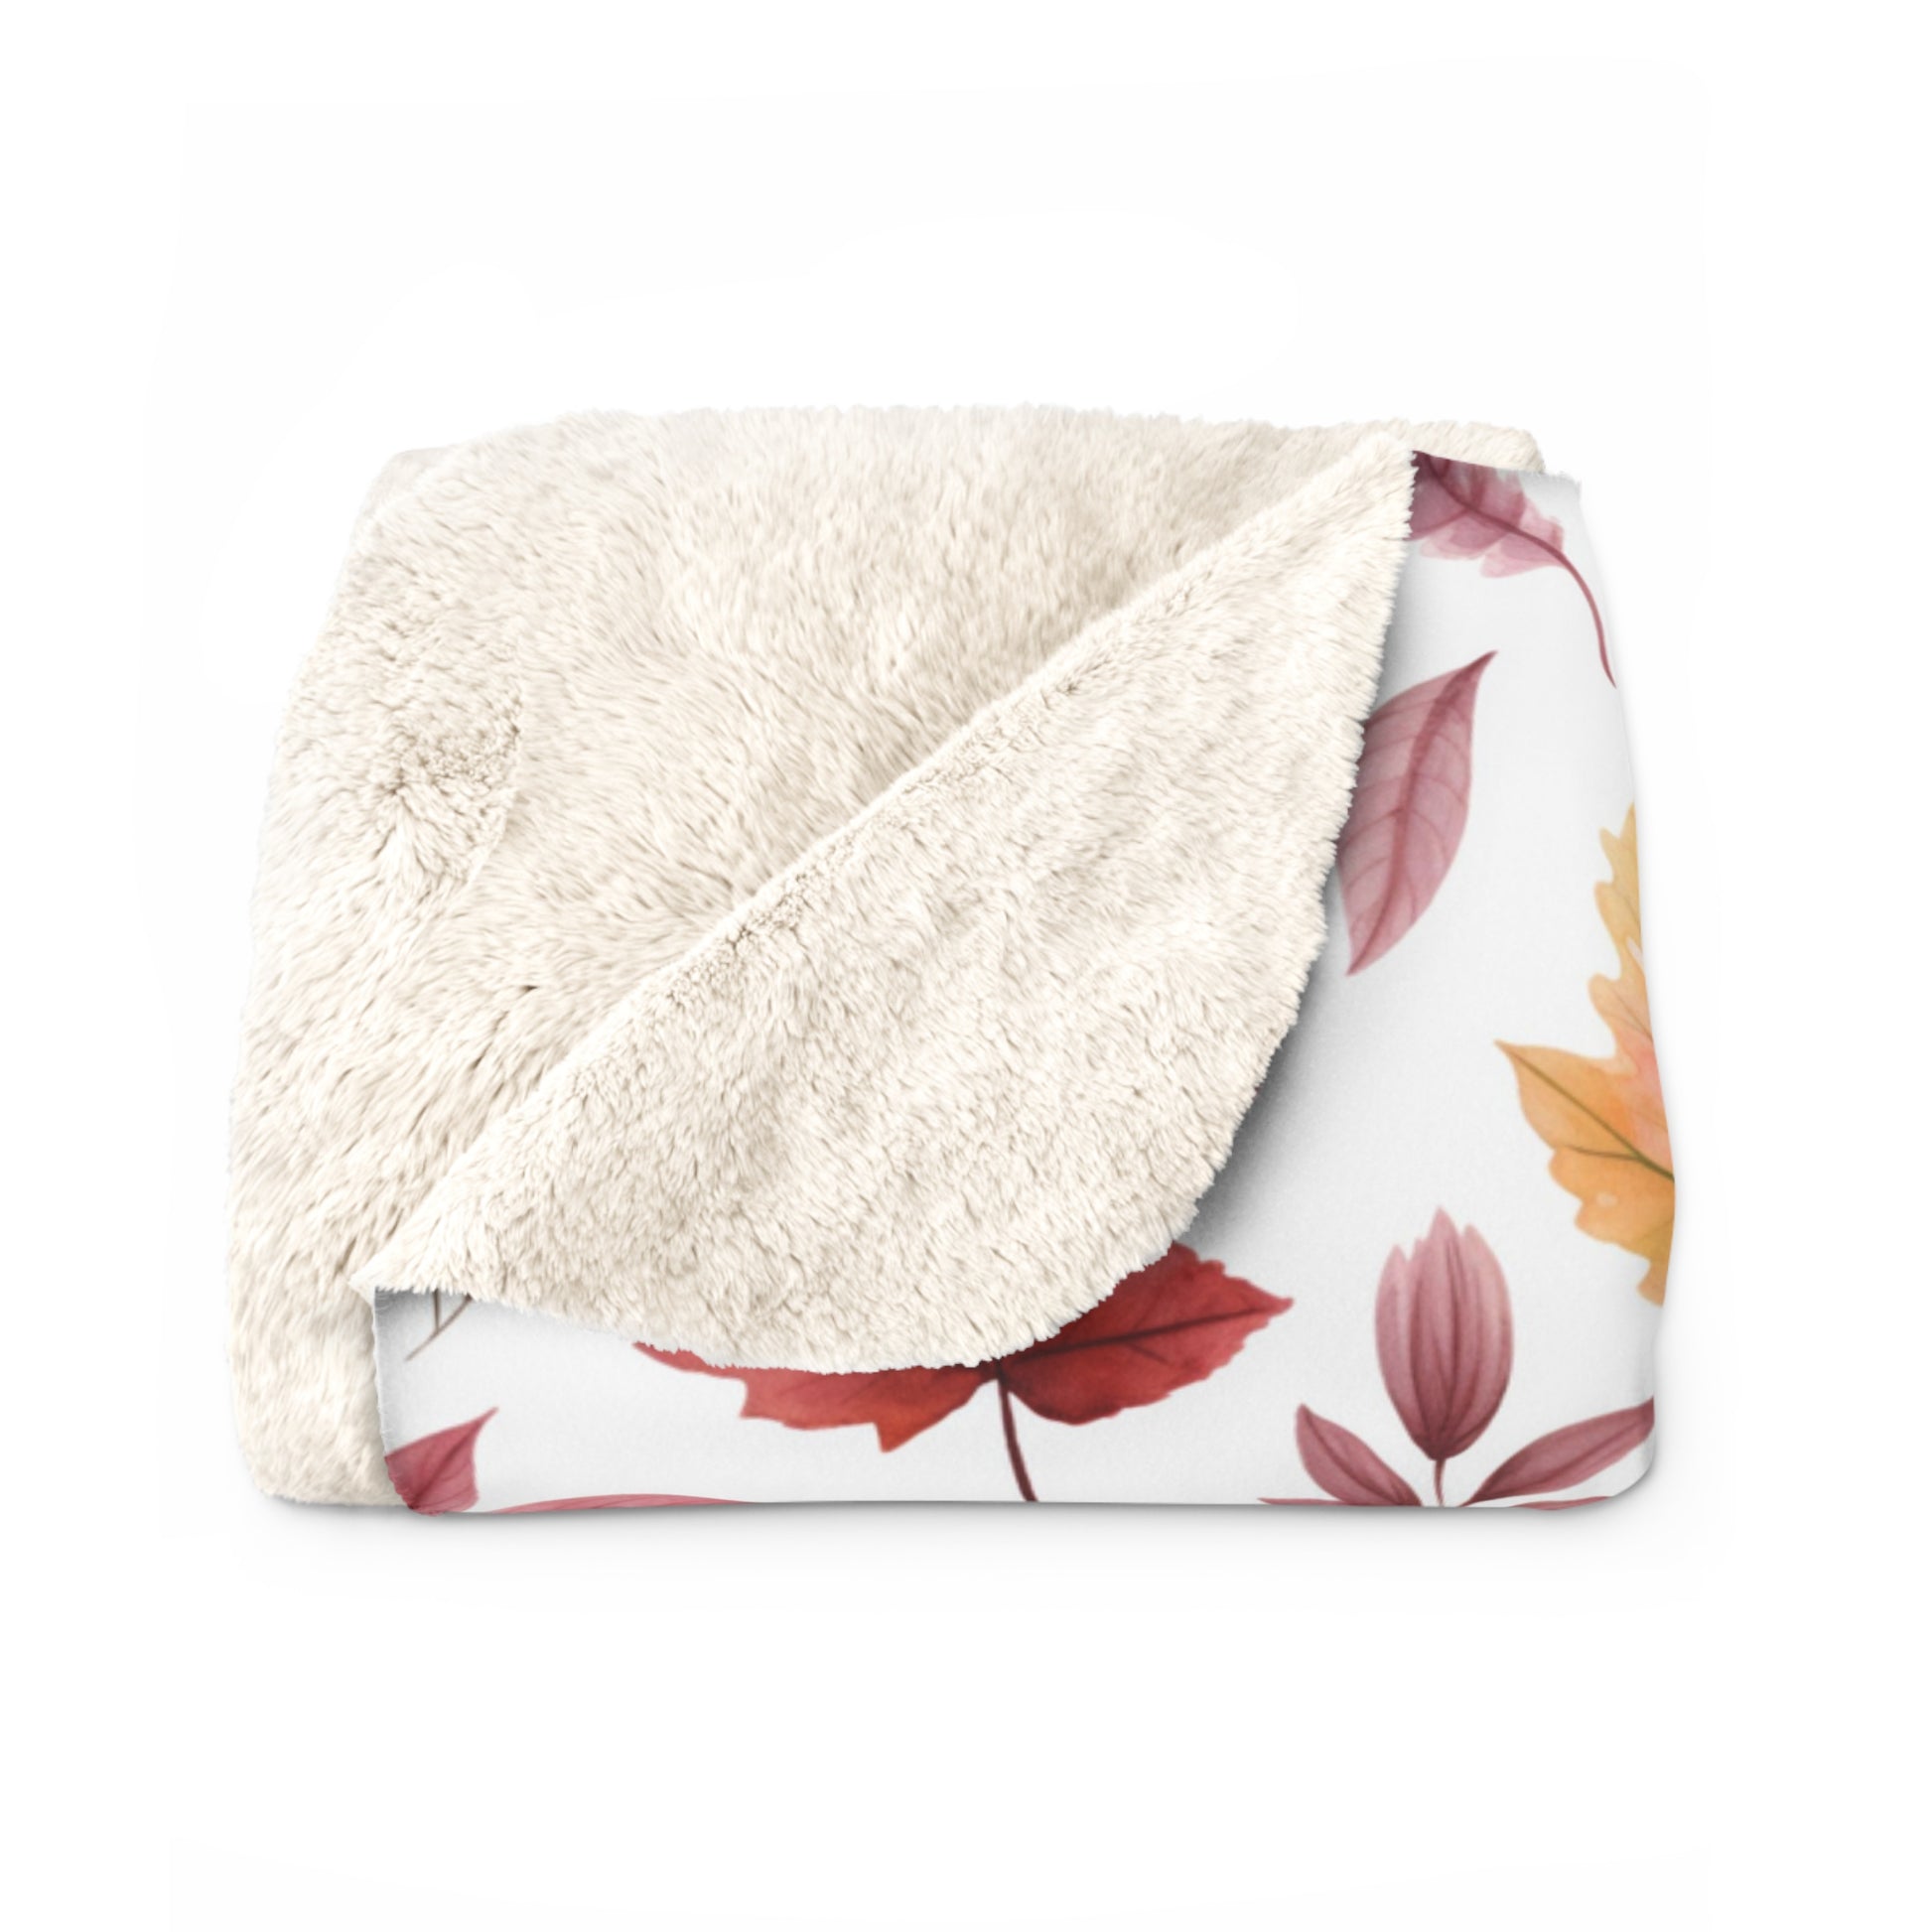 Autumn Floral Sherpa Fleece Blanket - Fall Floral Red Sherpa